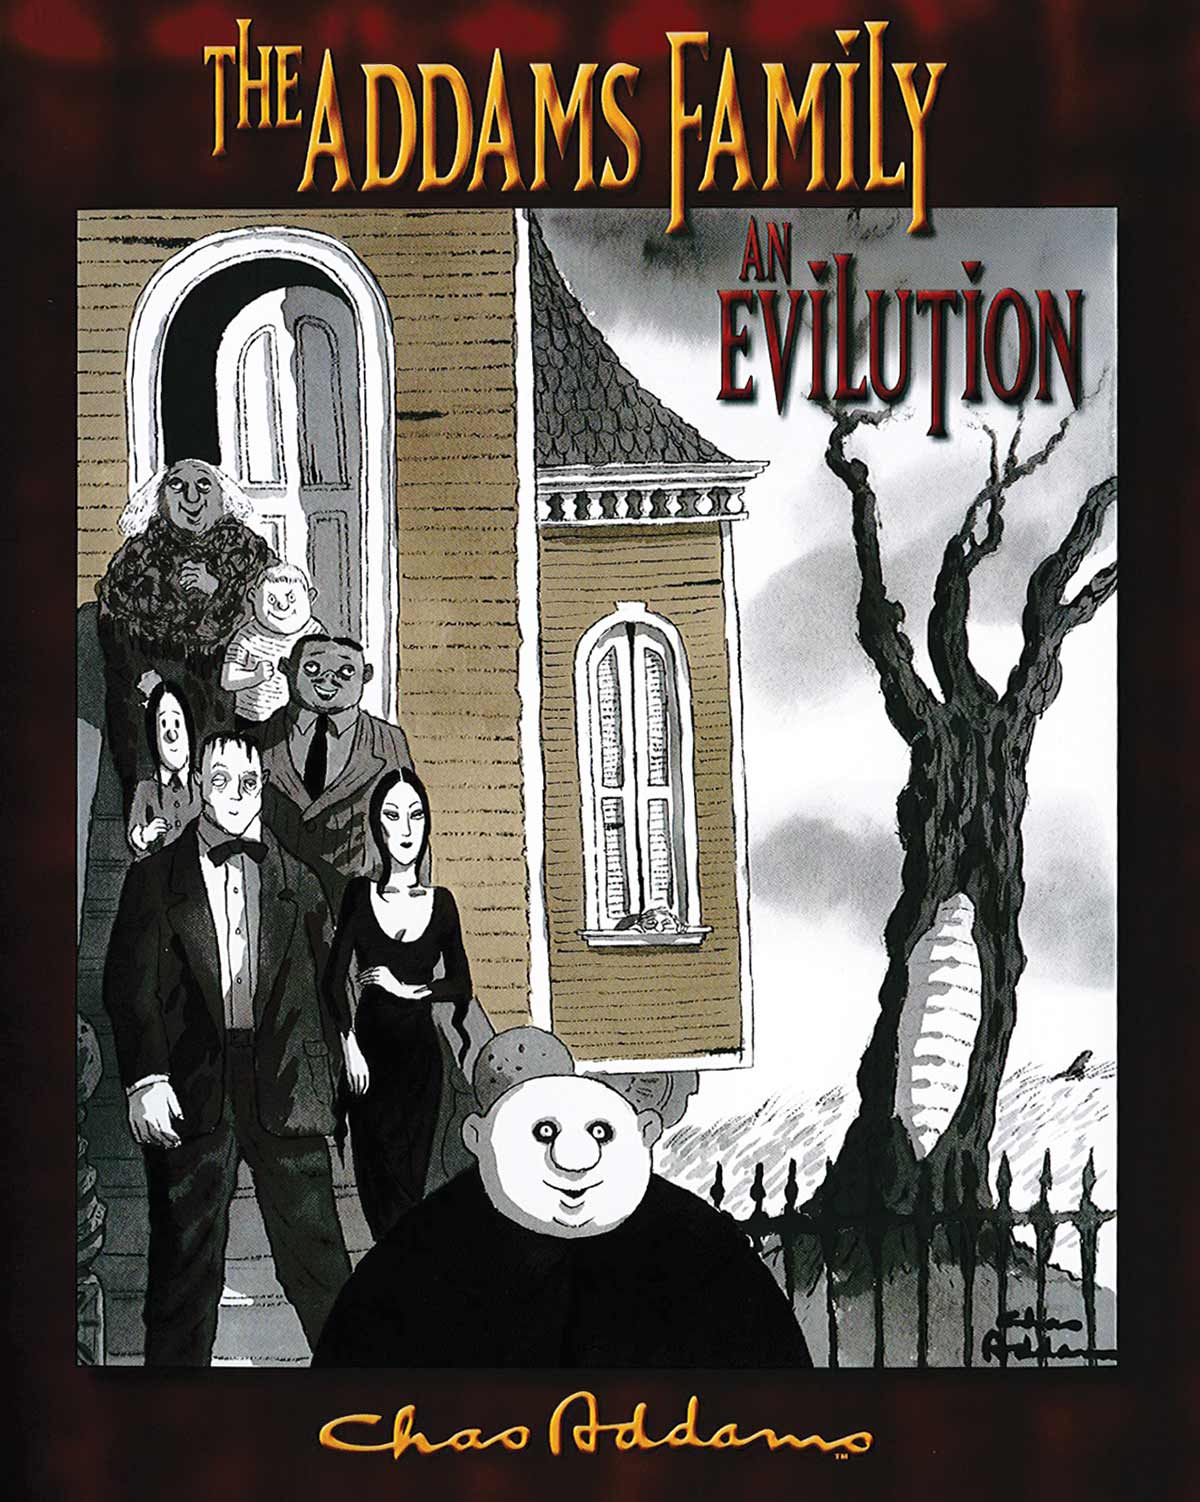 The Addams Family: An Evilution book cover.